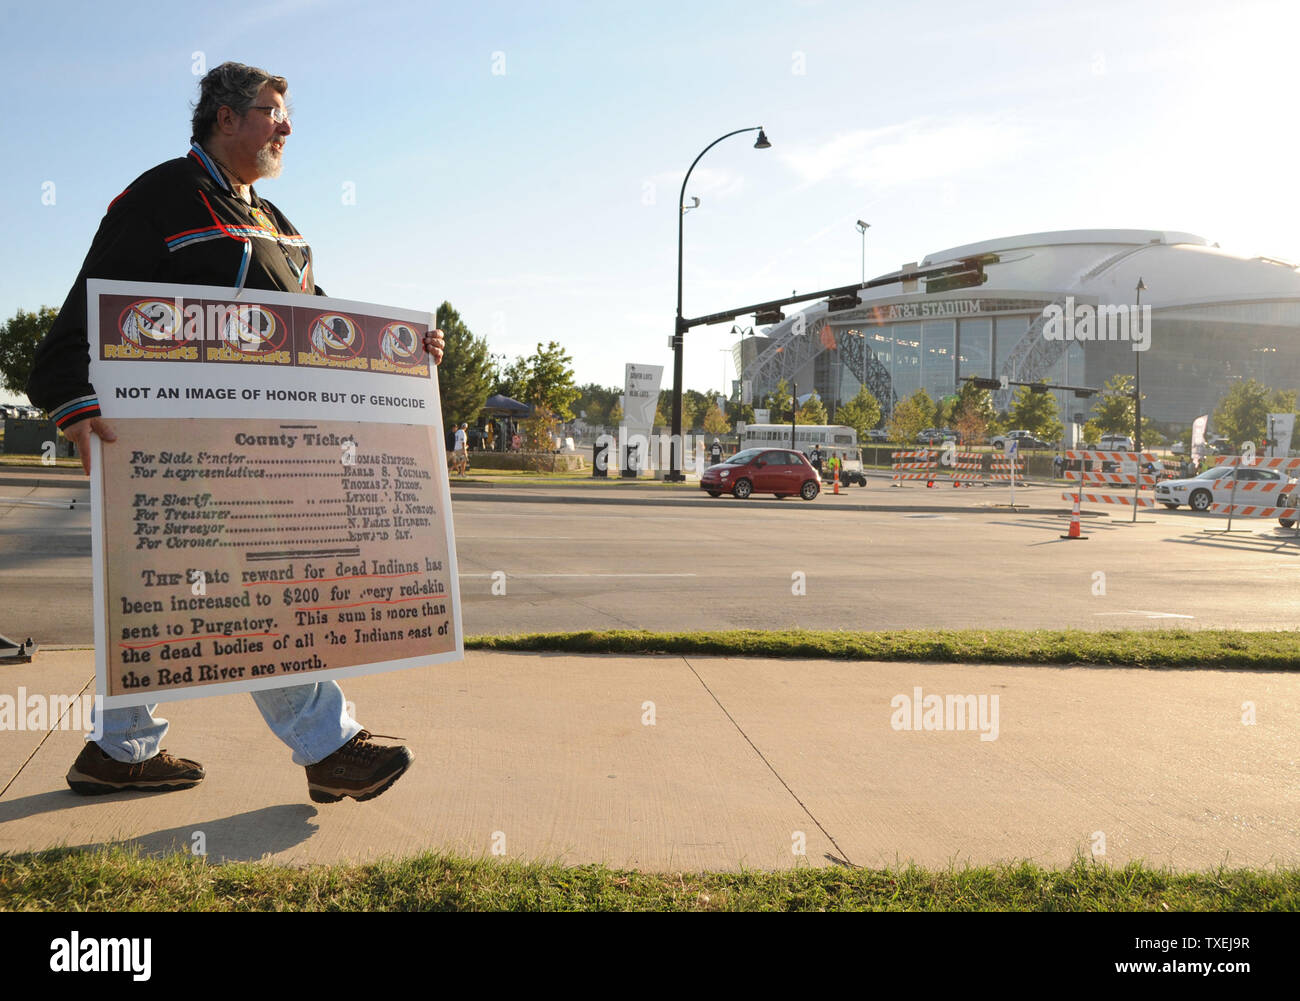 Protesters wanting a chance to the Washington Redskins mascot name hold signs outside AT&T Stadium prior to the Dallas Cowboys and Washington Redskins game on October 27, 2014 in Arlington, Texas.     UPI/Ian Halperin Stock Photo